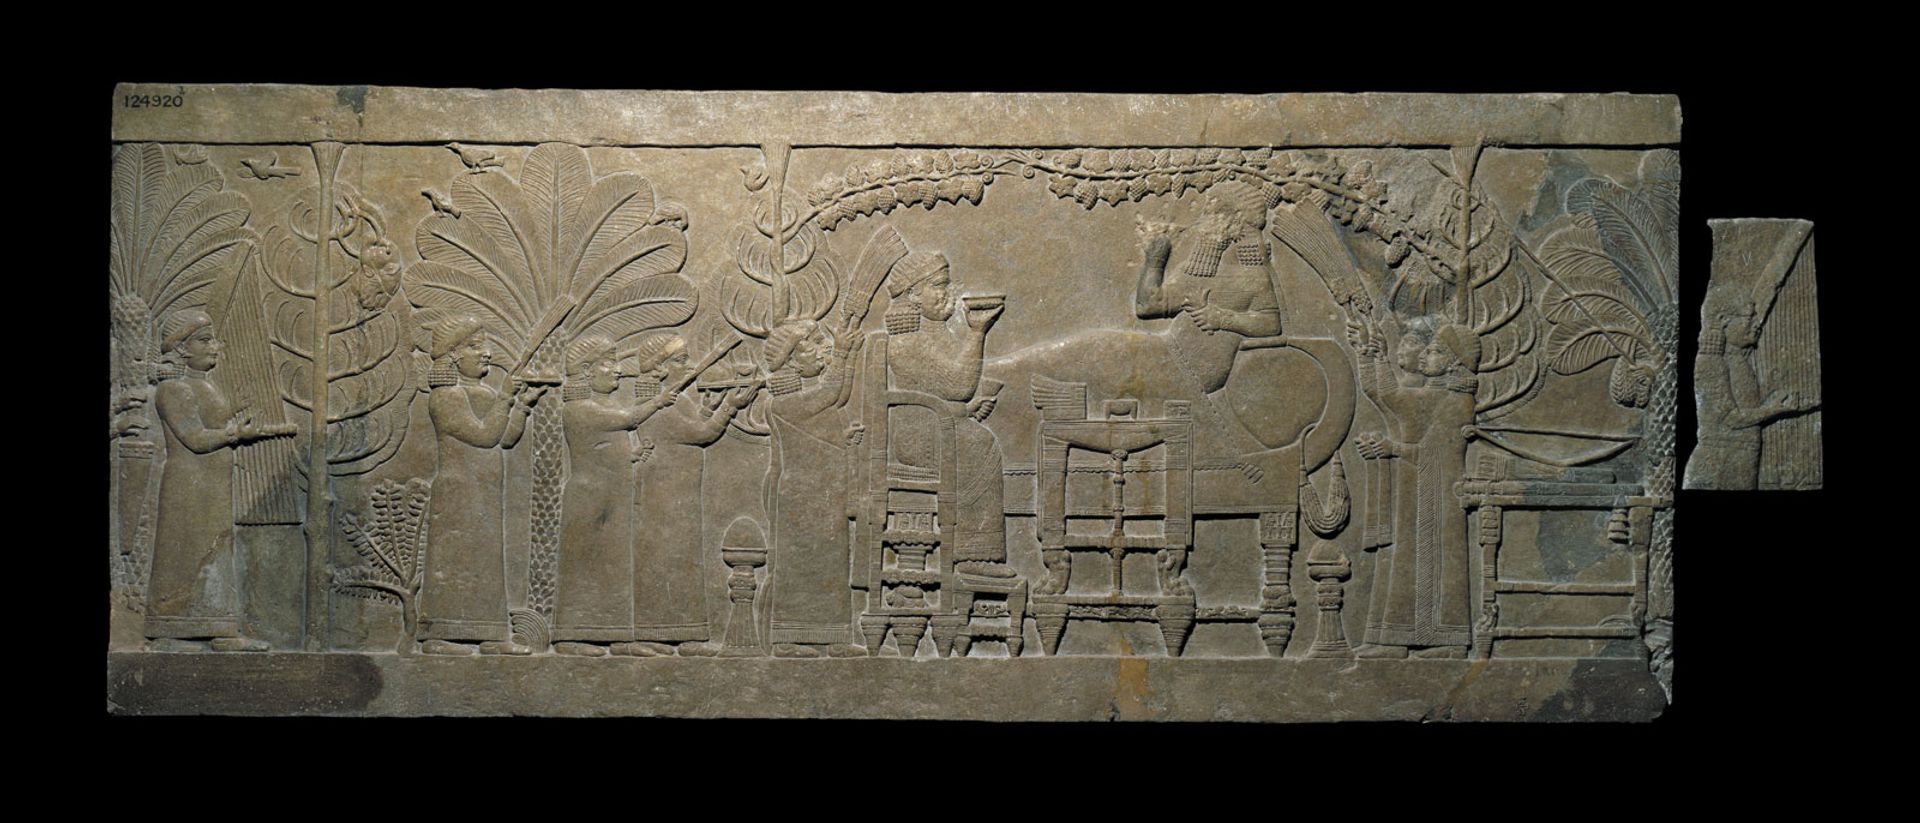 The Banquet Scene relief from the North Palace of Ashurbanipal, Nineveh, Iraq (around 645 BC) is widely regarded as the world's finest single relief panel from Assyria © The Trustees of the British Museum